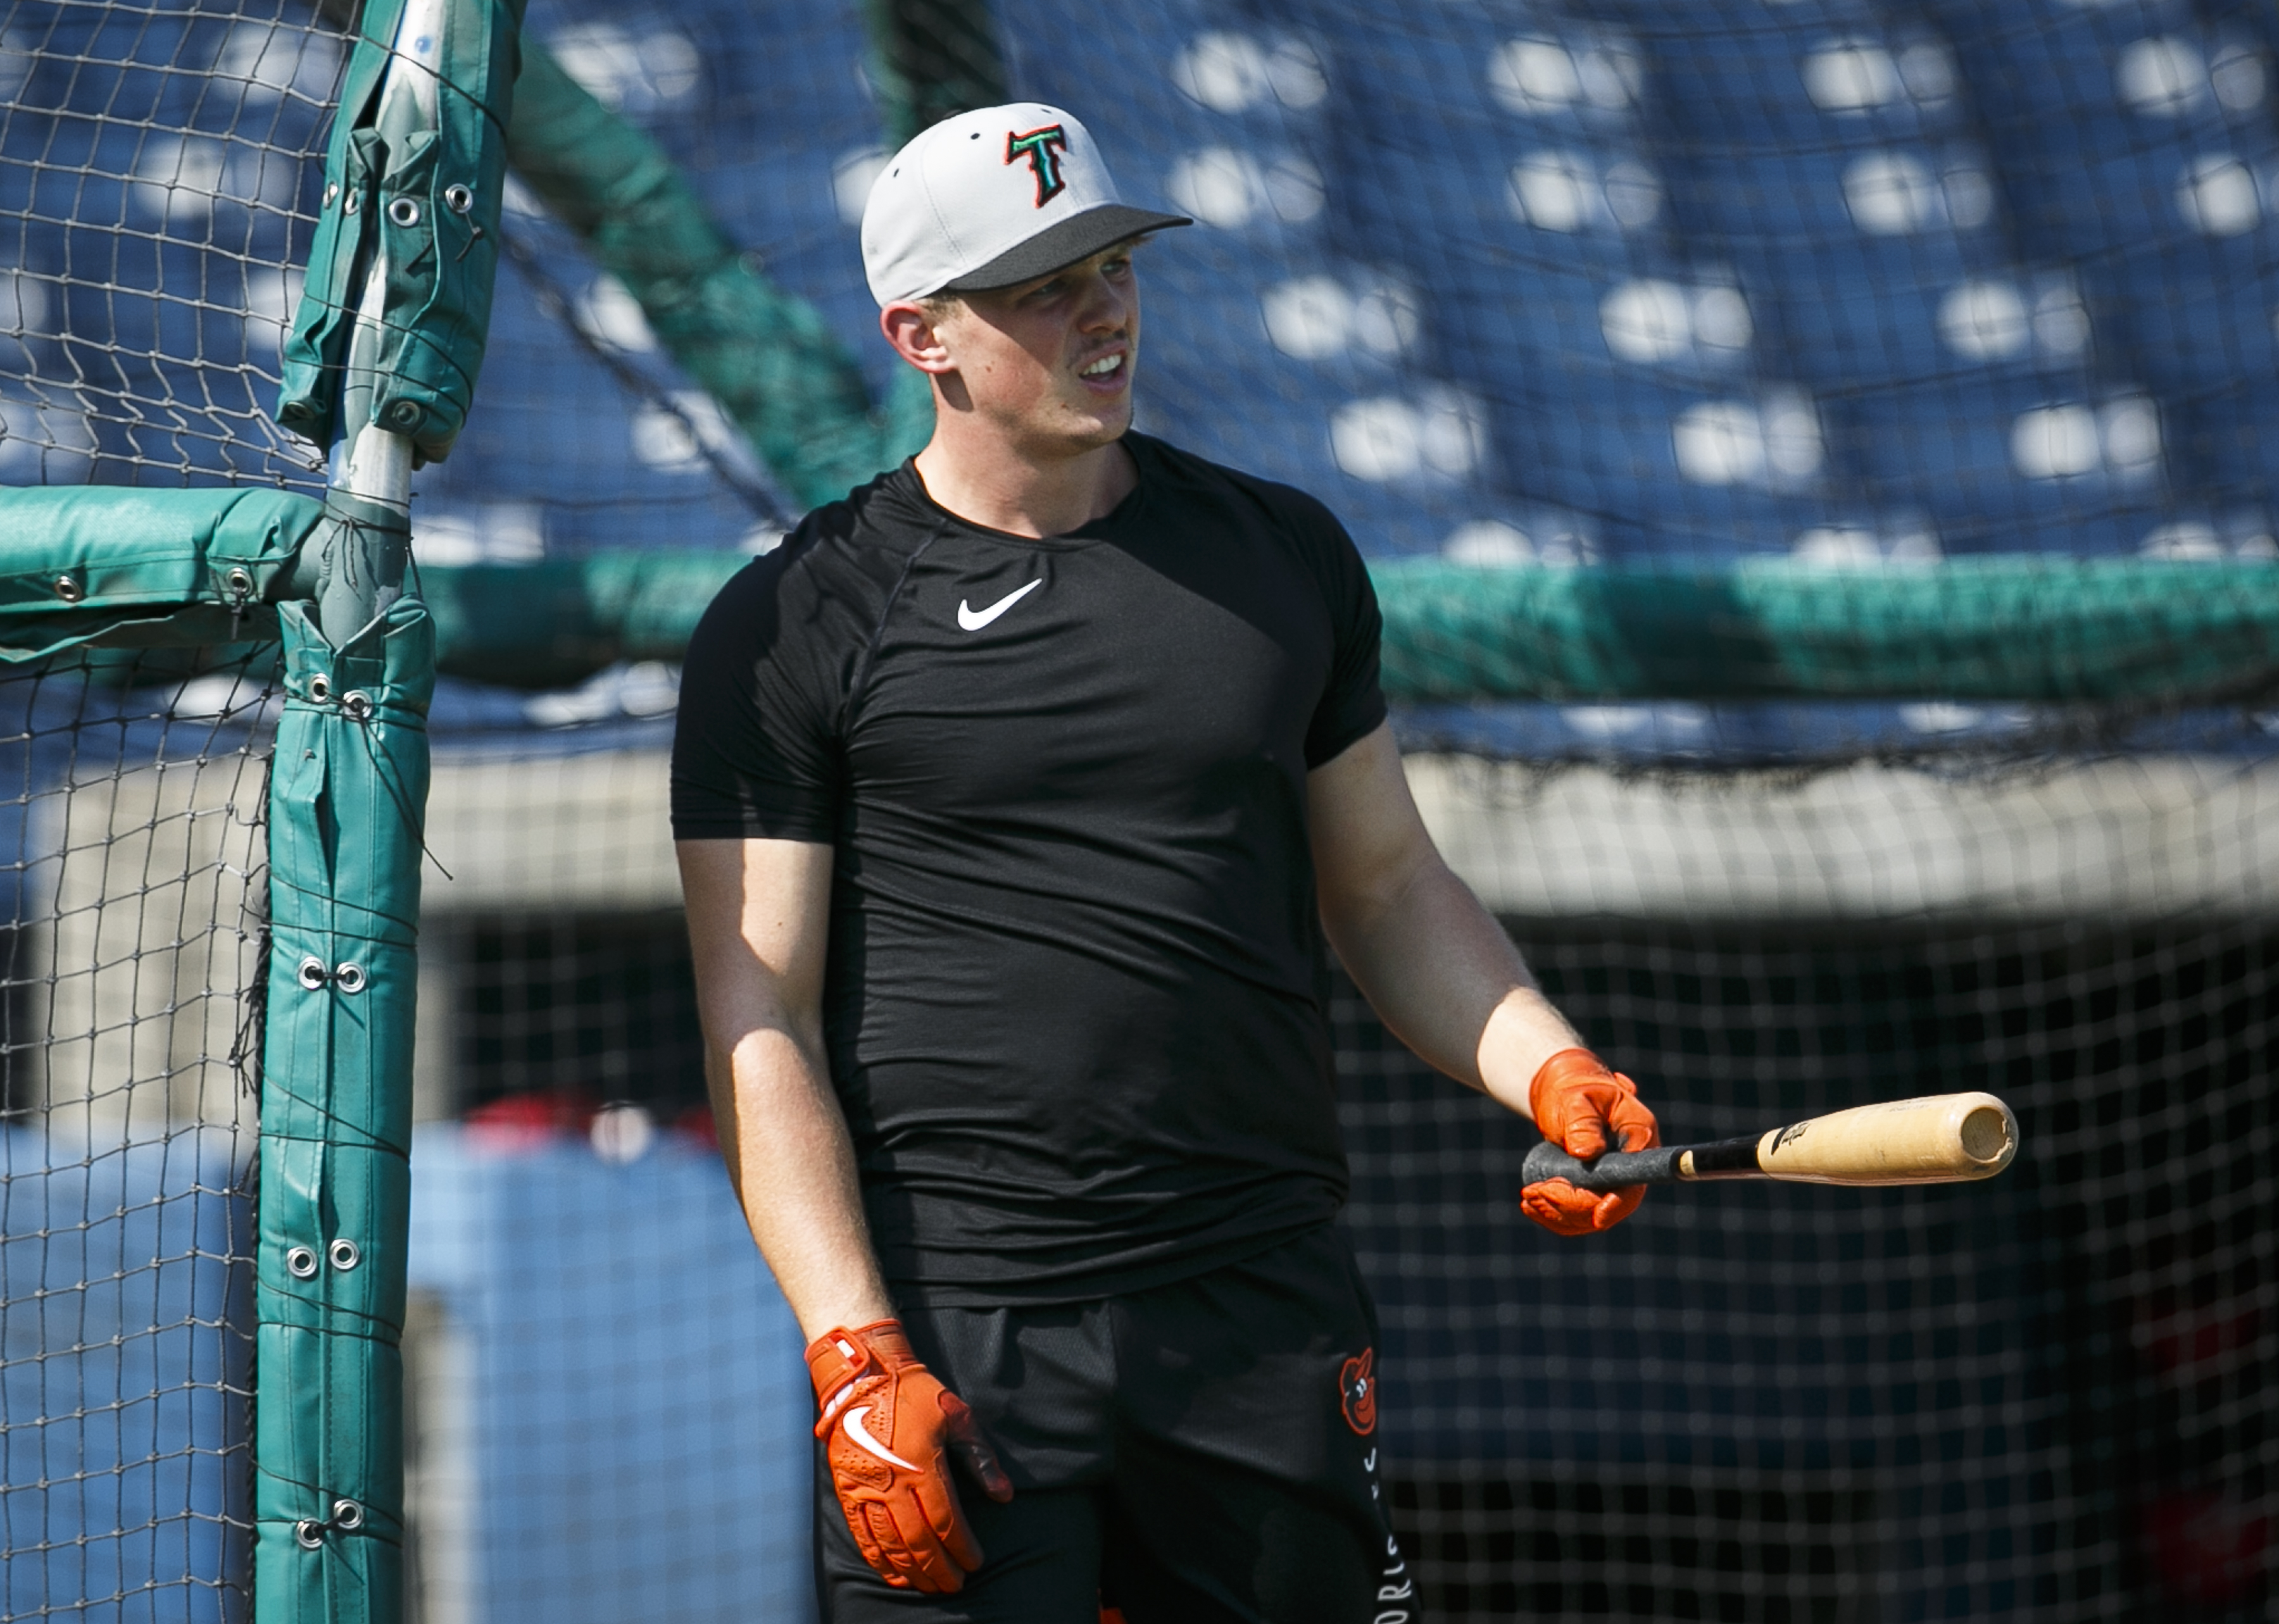 Orioles call up top prospect Adley Rutschman from Tides